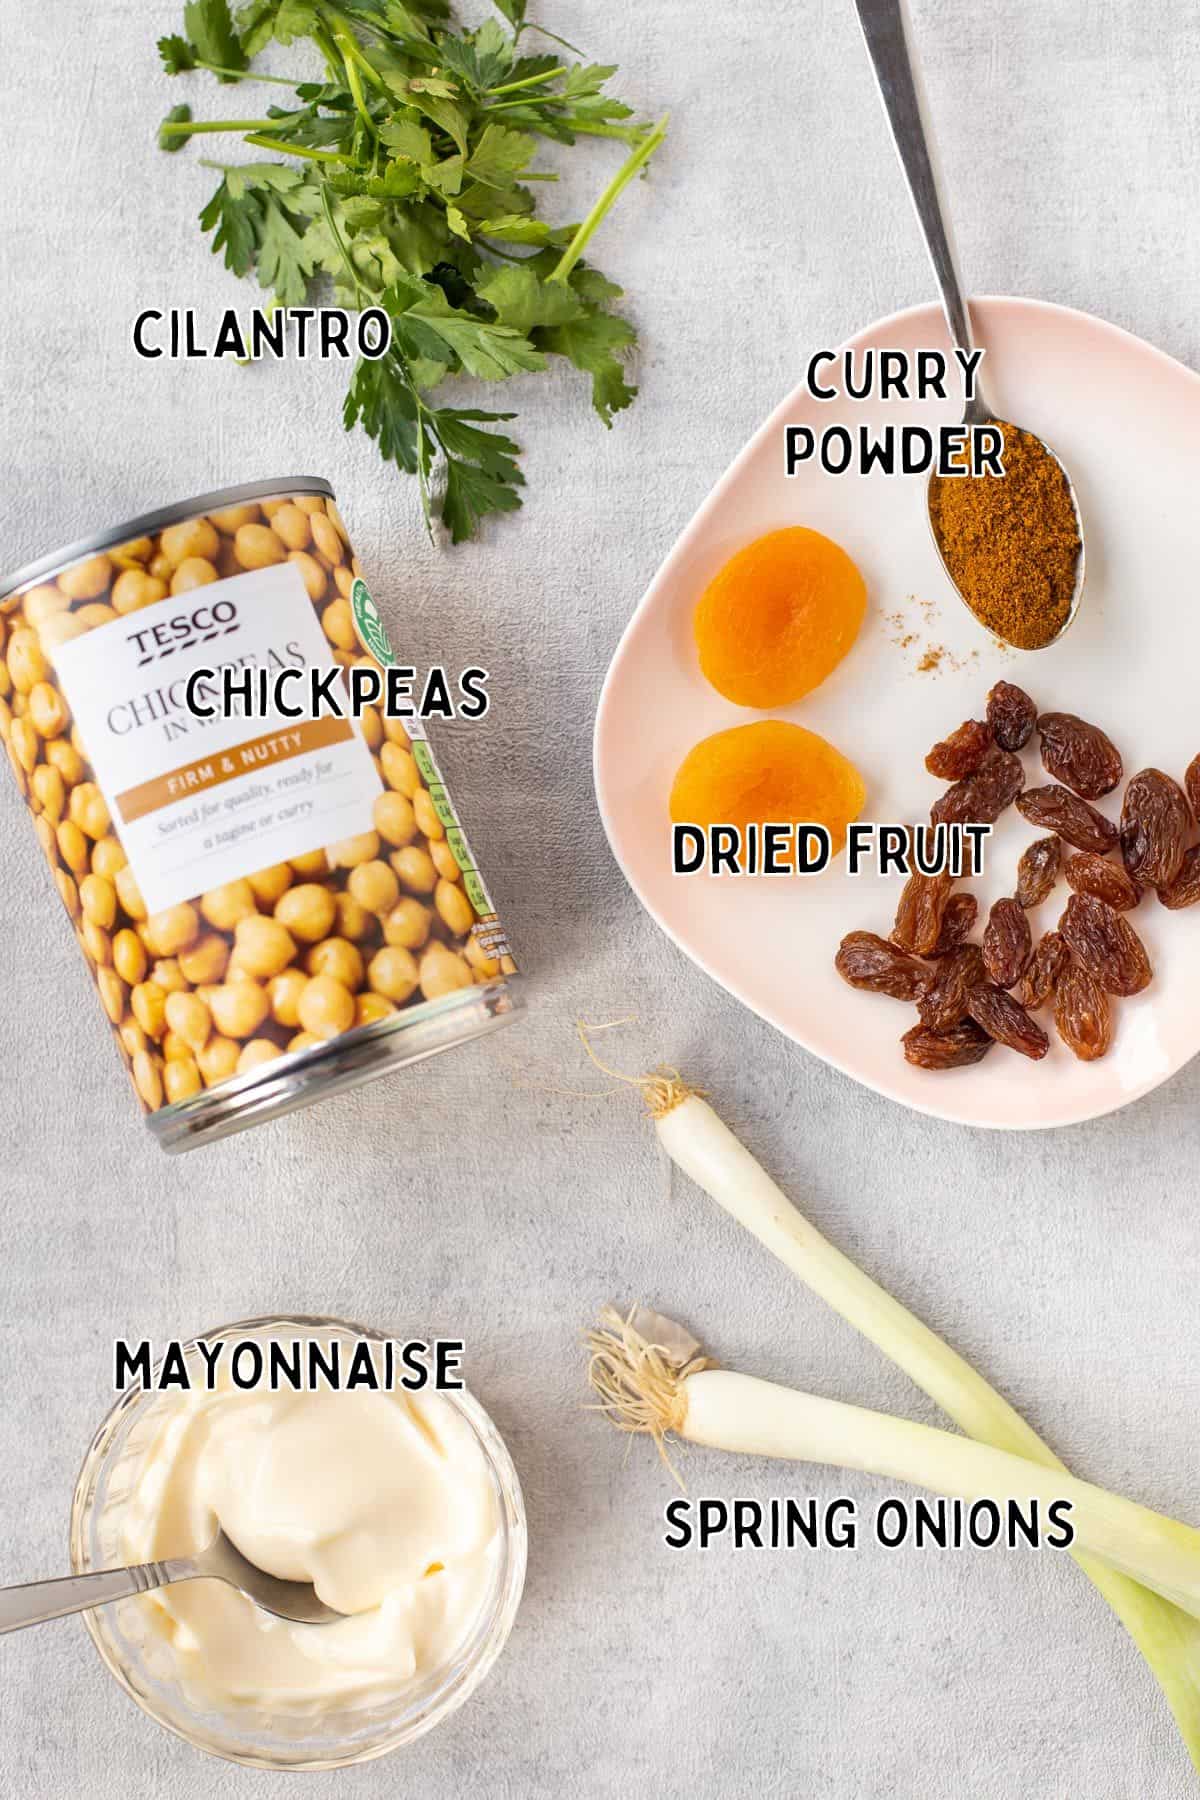 Ingredients for coronation chickpeas with text overlay.